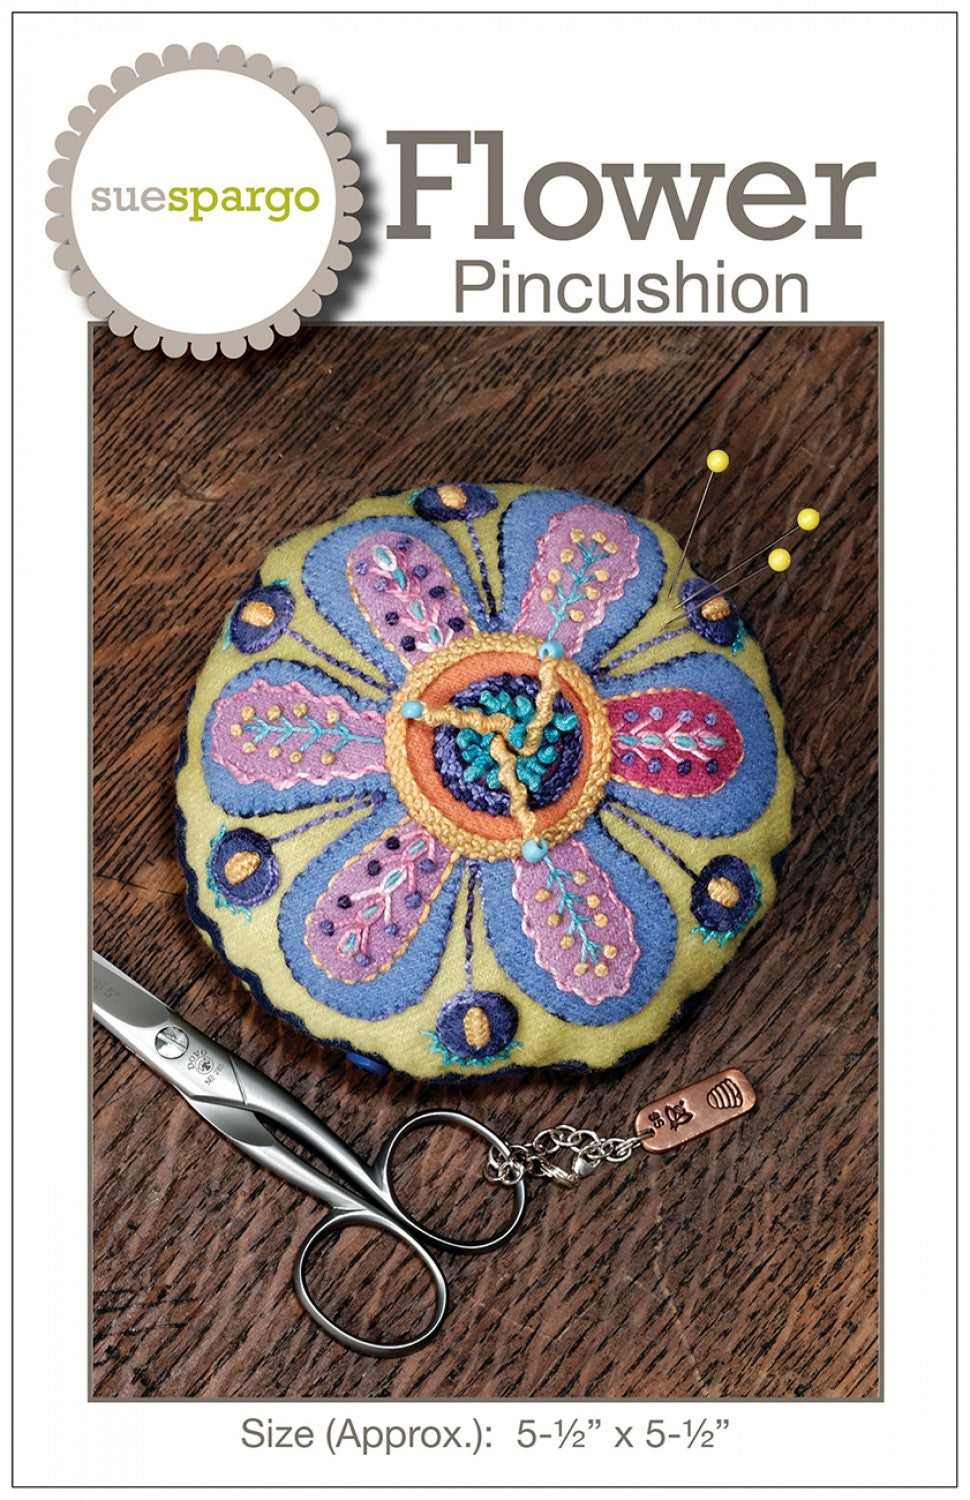 Flower Pincushion - Applique, Embroidery, and Sewing Pattern by Sue Spargo of Folk Art Quilts